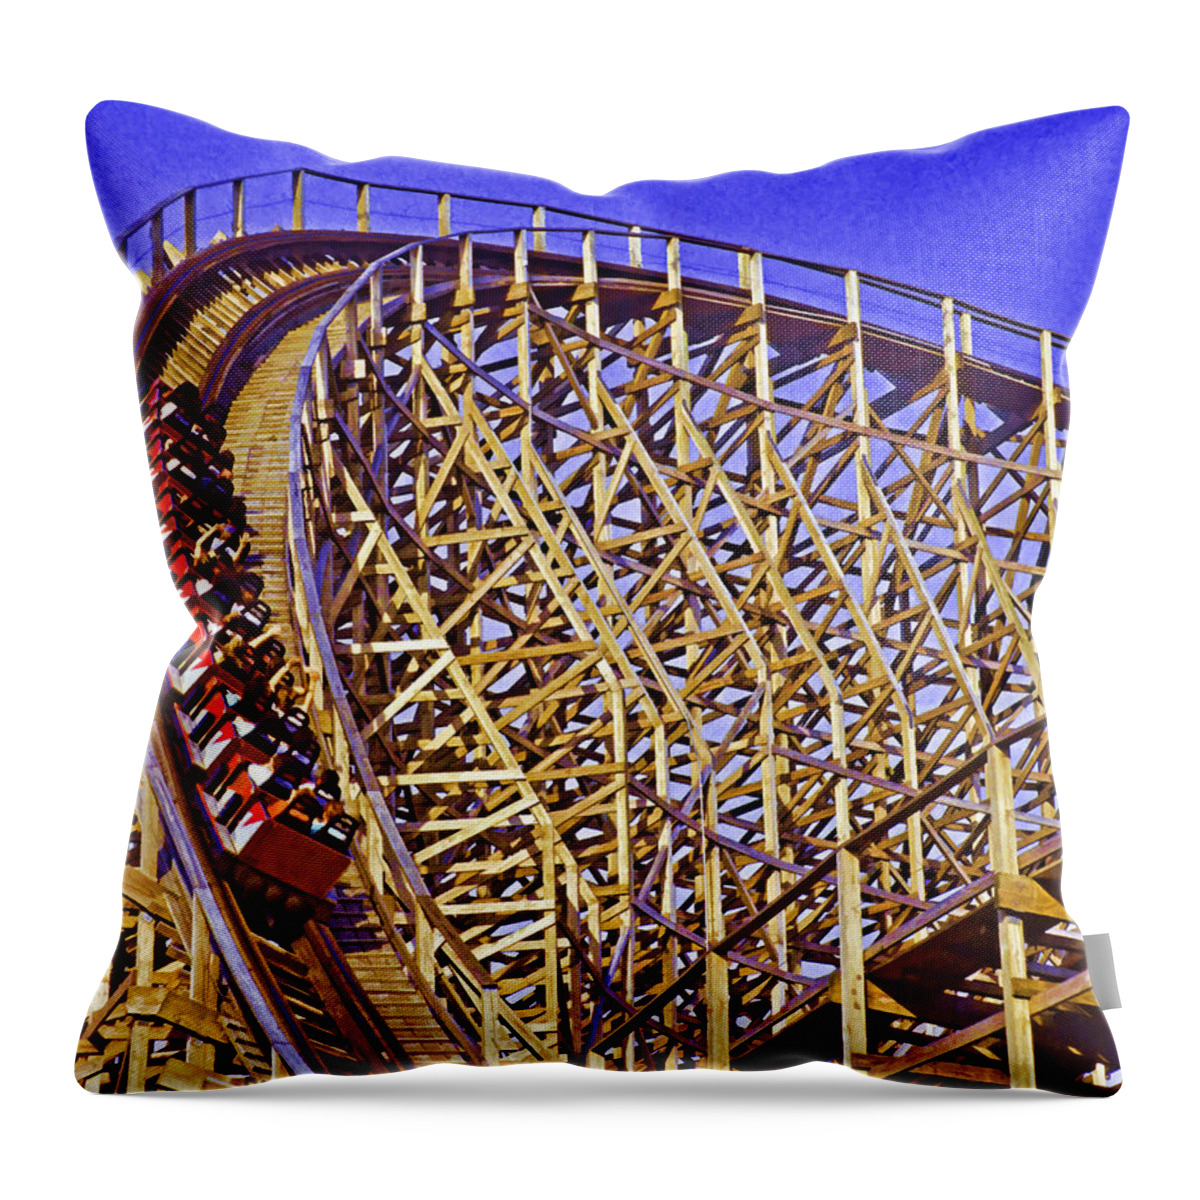 Usa Throw Pillow featuring the photograph Roller Coaster by Dennis Cox